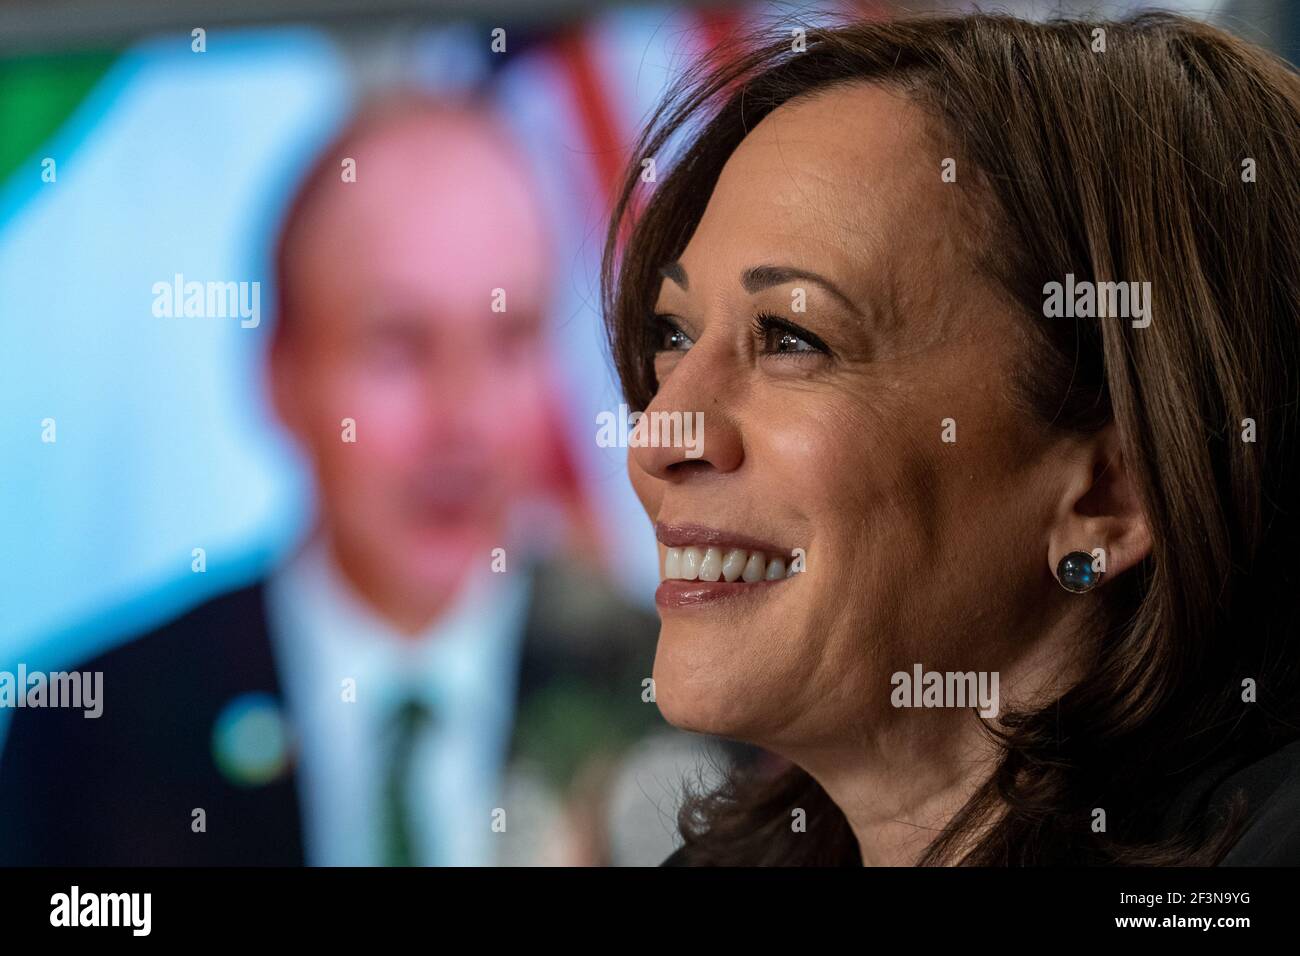 Washington, United States. 17th Mar, 2021. United States Vice President Kamala Harris hosts Irish Prime Minister Micheál Martin during a virtual bilateral meeting in the Vice President's Ceremonial Office in Washington, DC on St. Patrick's Day, Wednesday, March 17, 2021. Photo by Ken Cedeno/UPI Credit: UPI/Alamy Live News Stock Photo